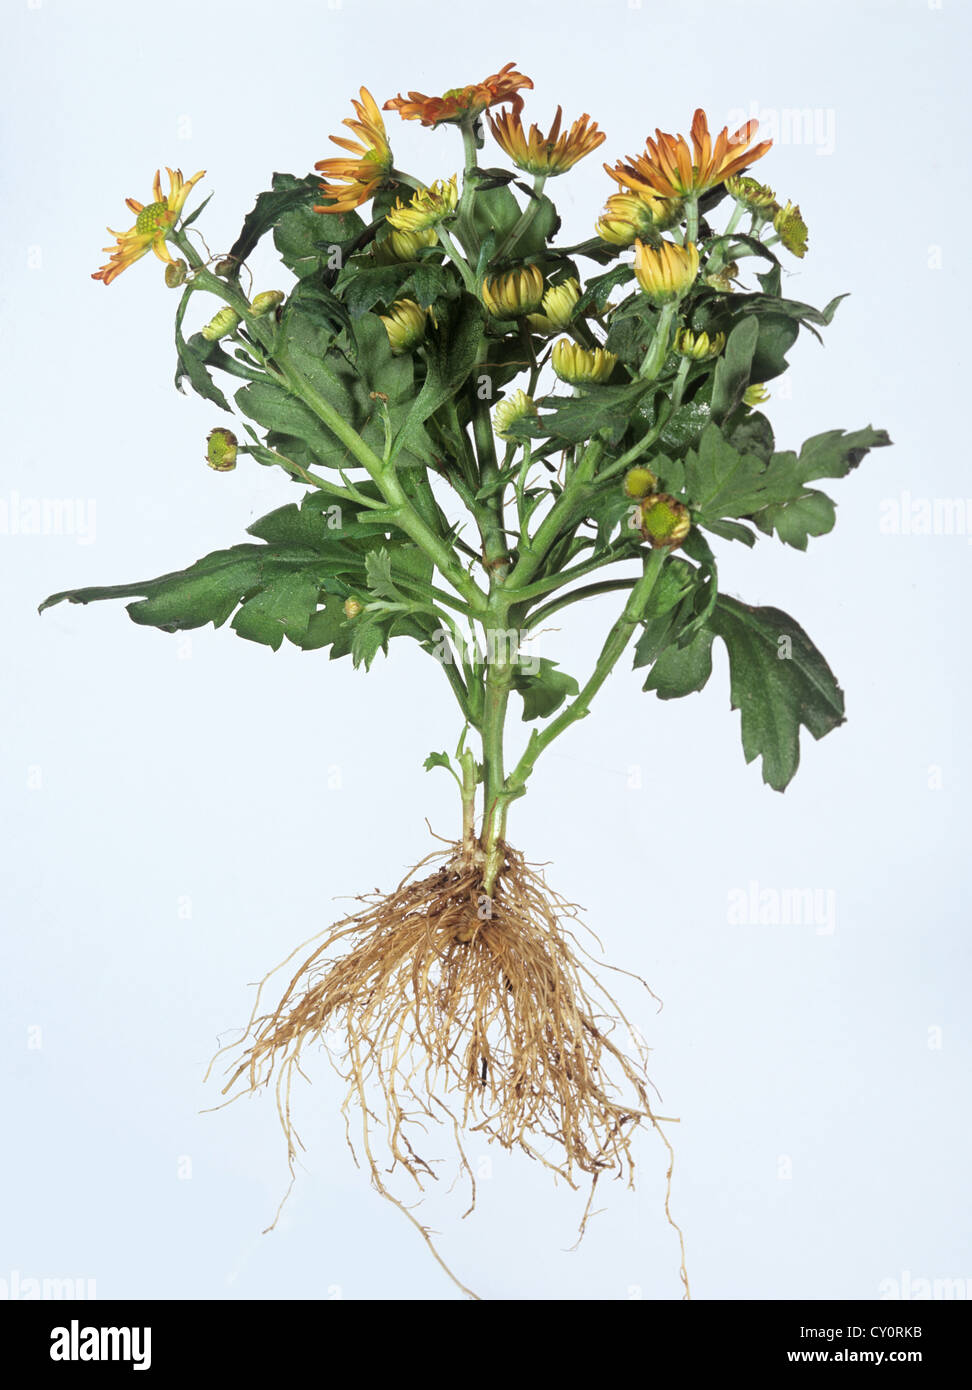 Chrysanthemum plant showing flowers, foliage and roots against a white background Stock Photo